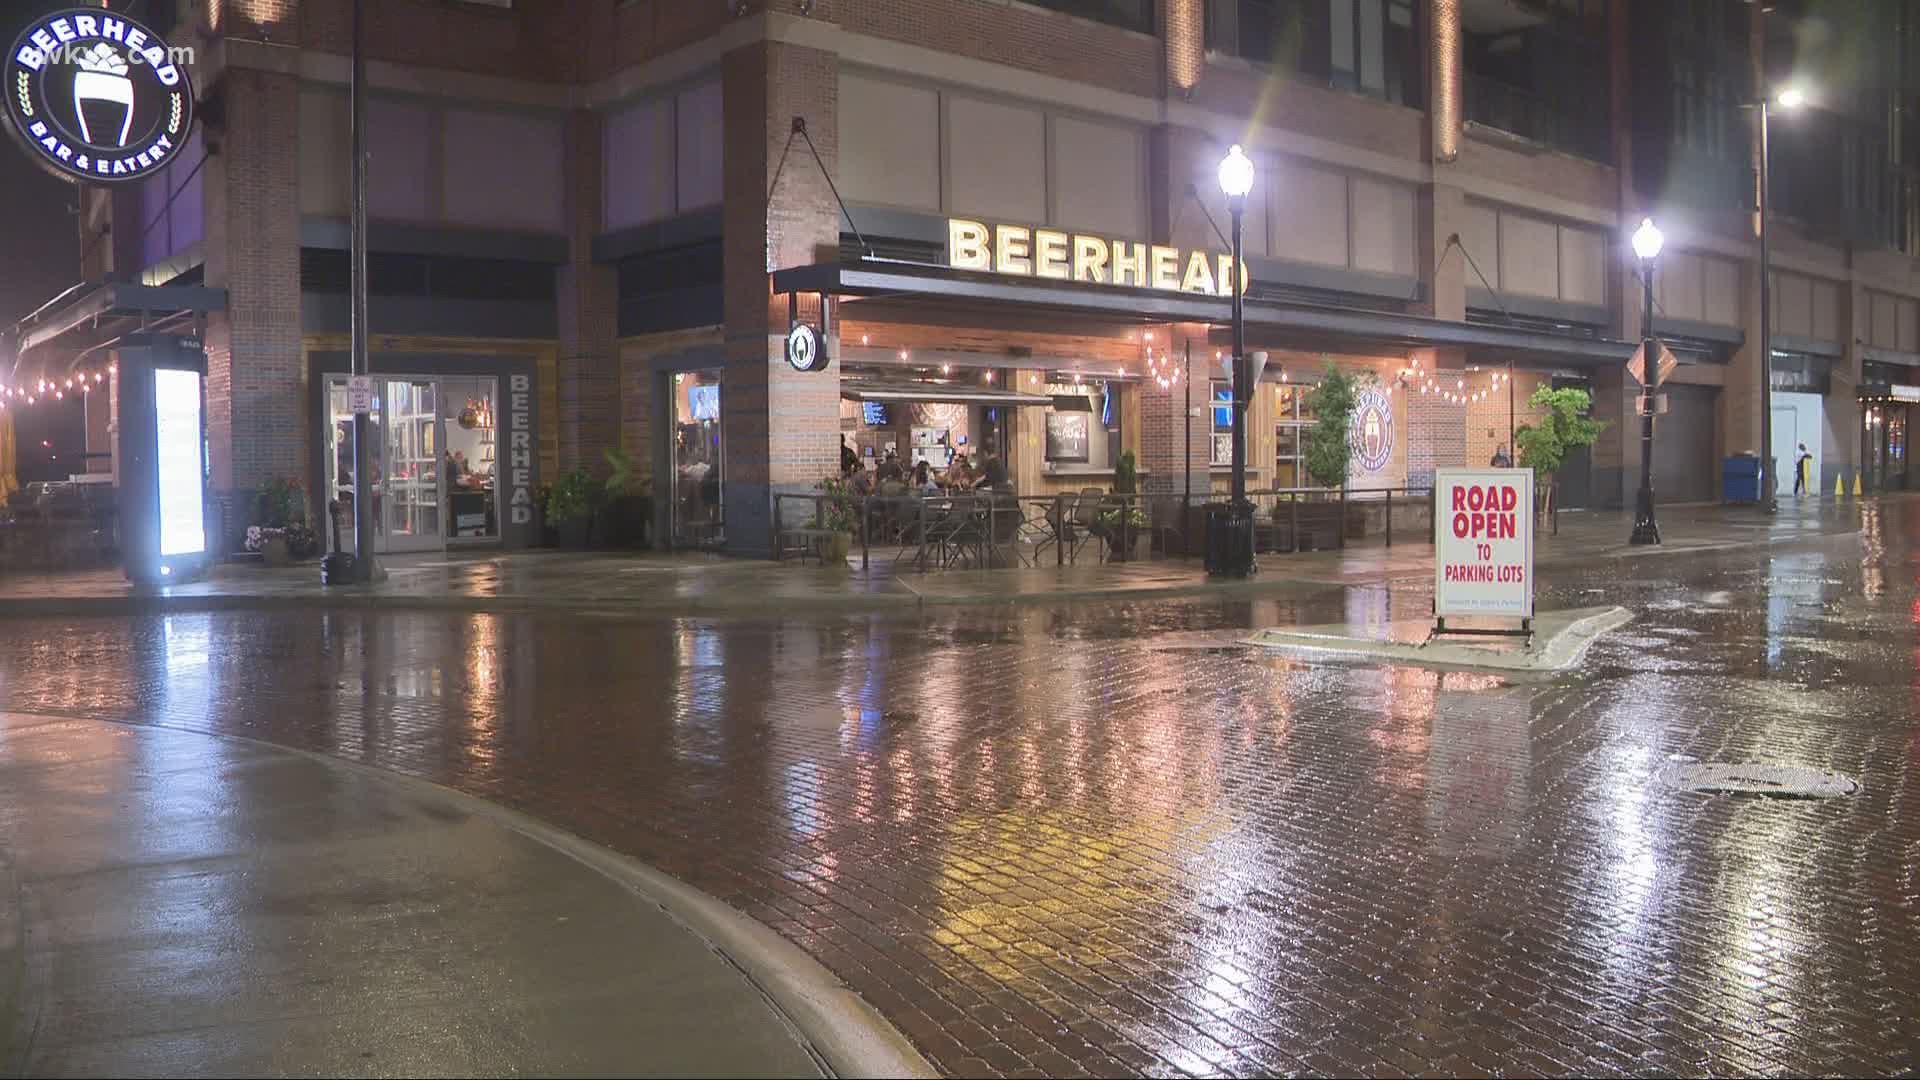 On Saturday, bars and restaurants adhered to new state protocols and last call was at 10 p.m. Patrons had until 11 p.m. to finish their drinks.